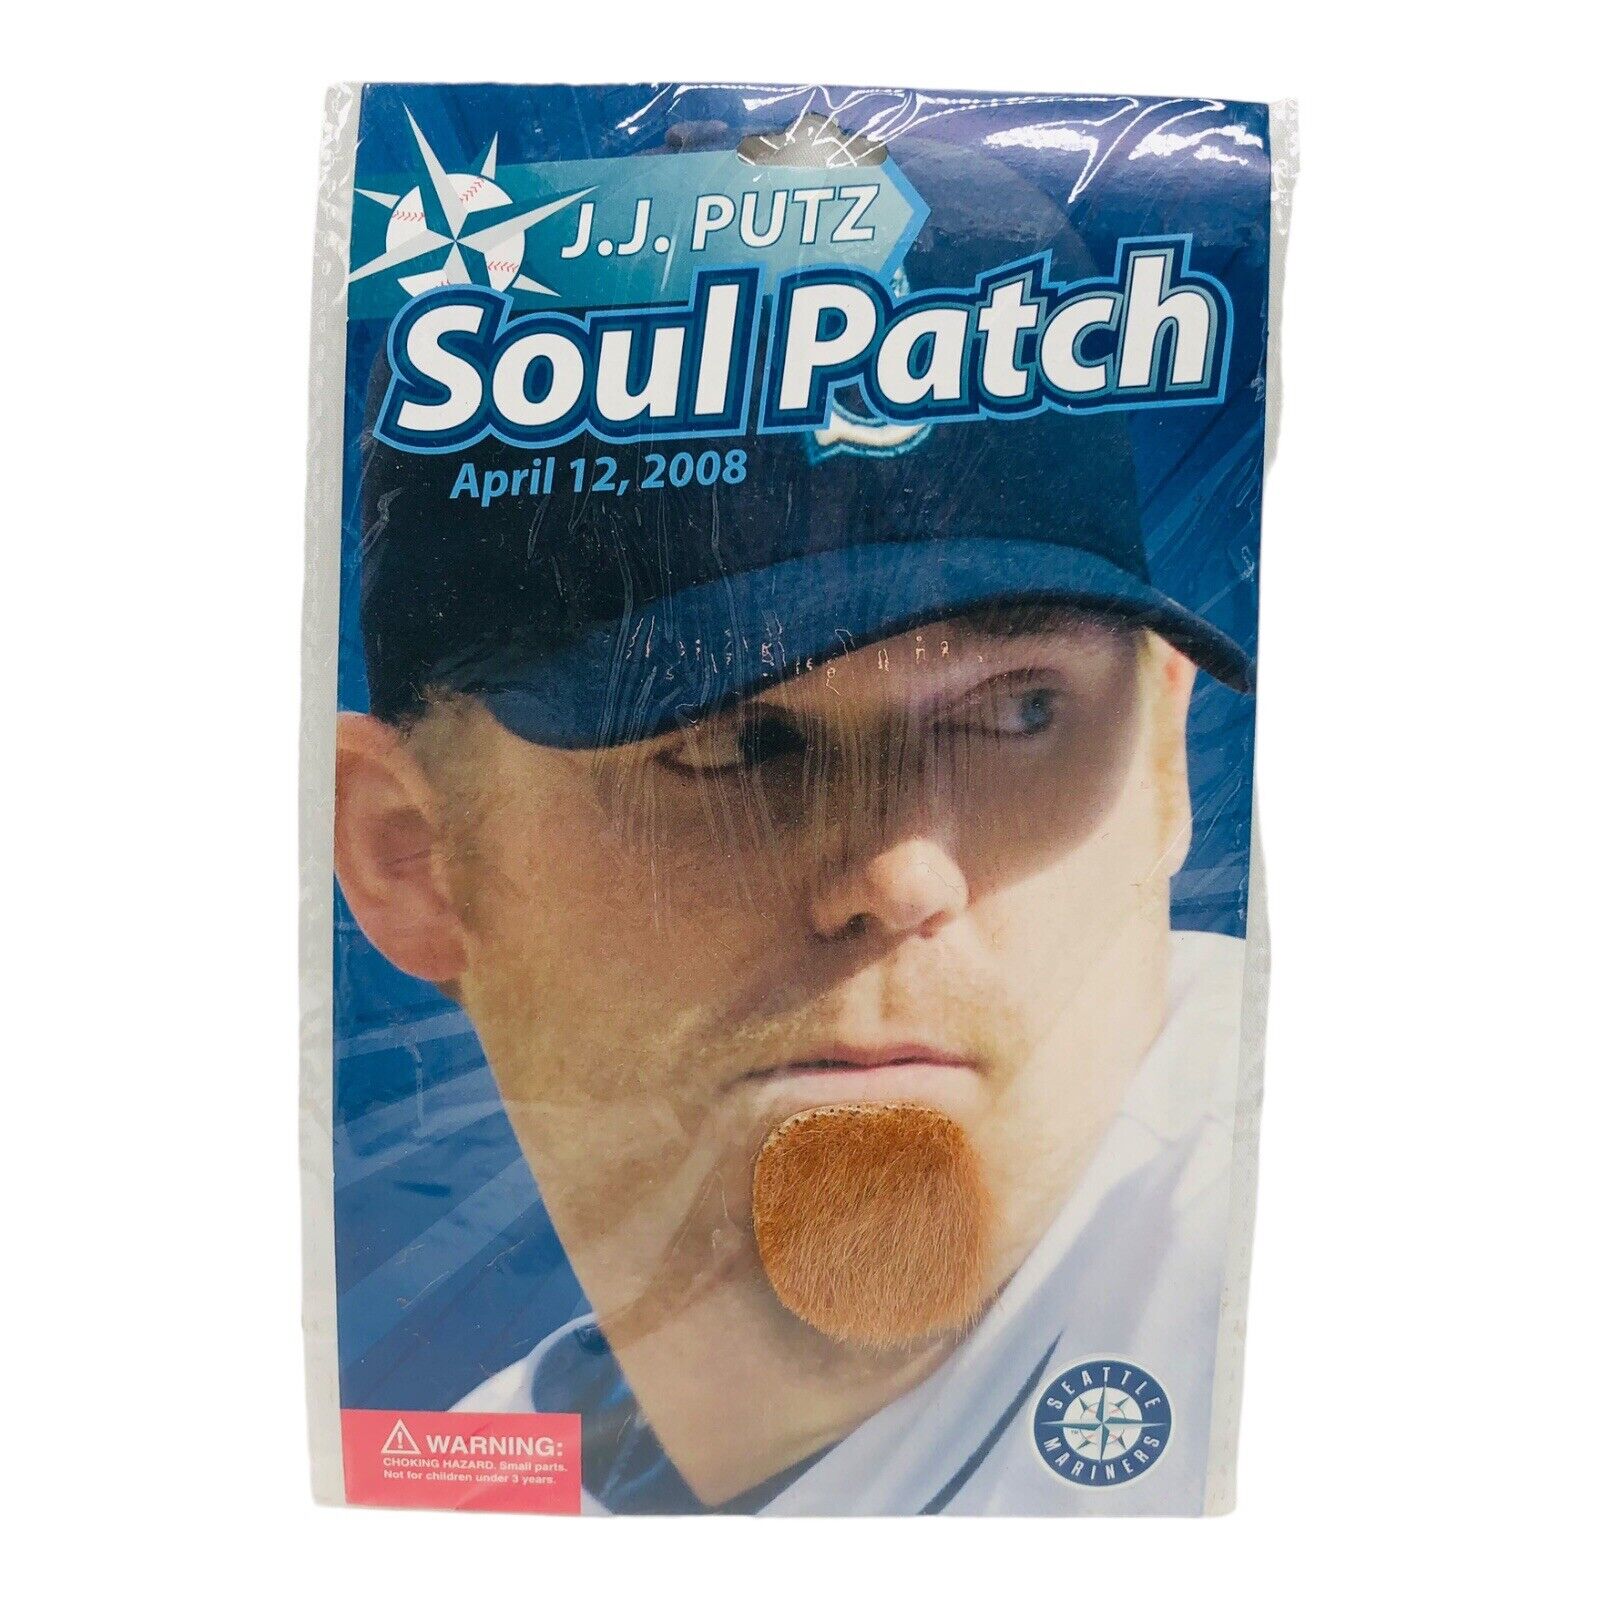 NEW JJ Putz SOUL PATCH SGA SEATTLE MARINERS Red Faux Facial Hair Cosplay Costume